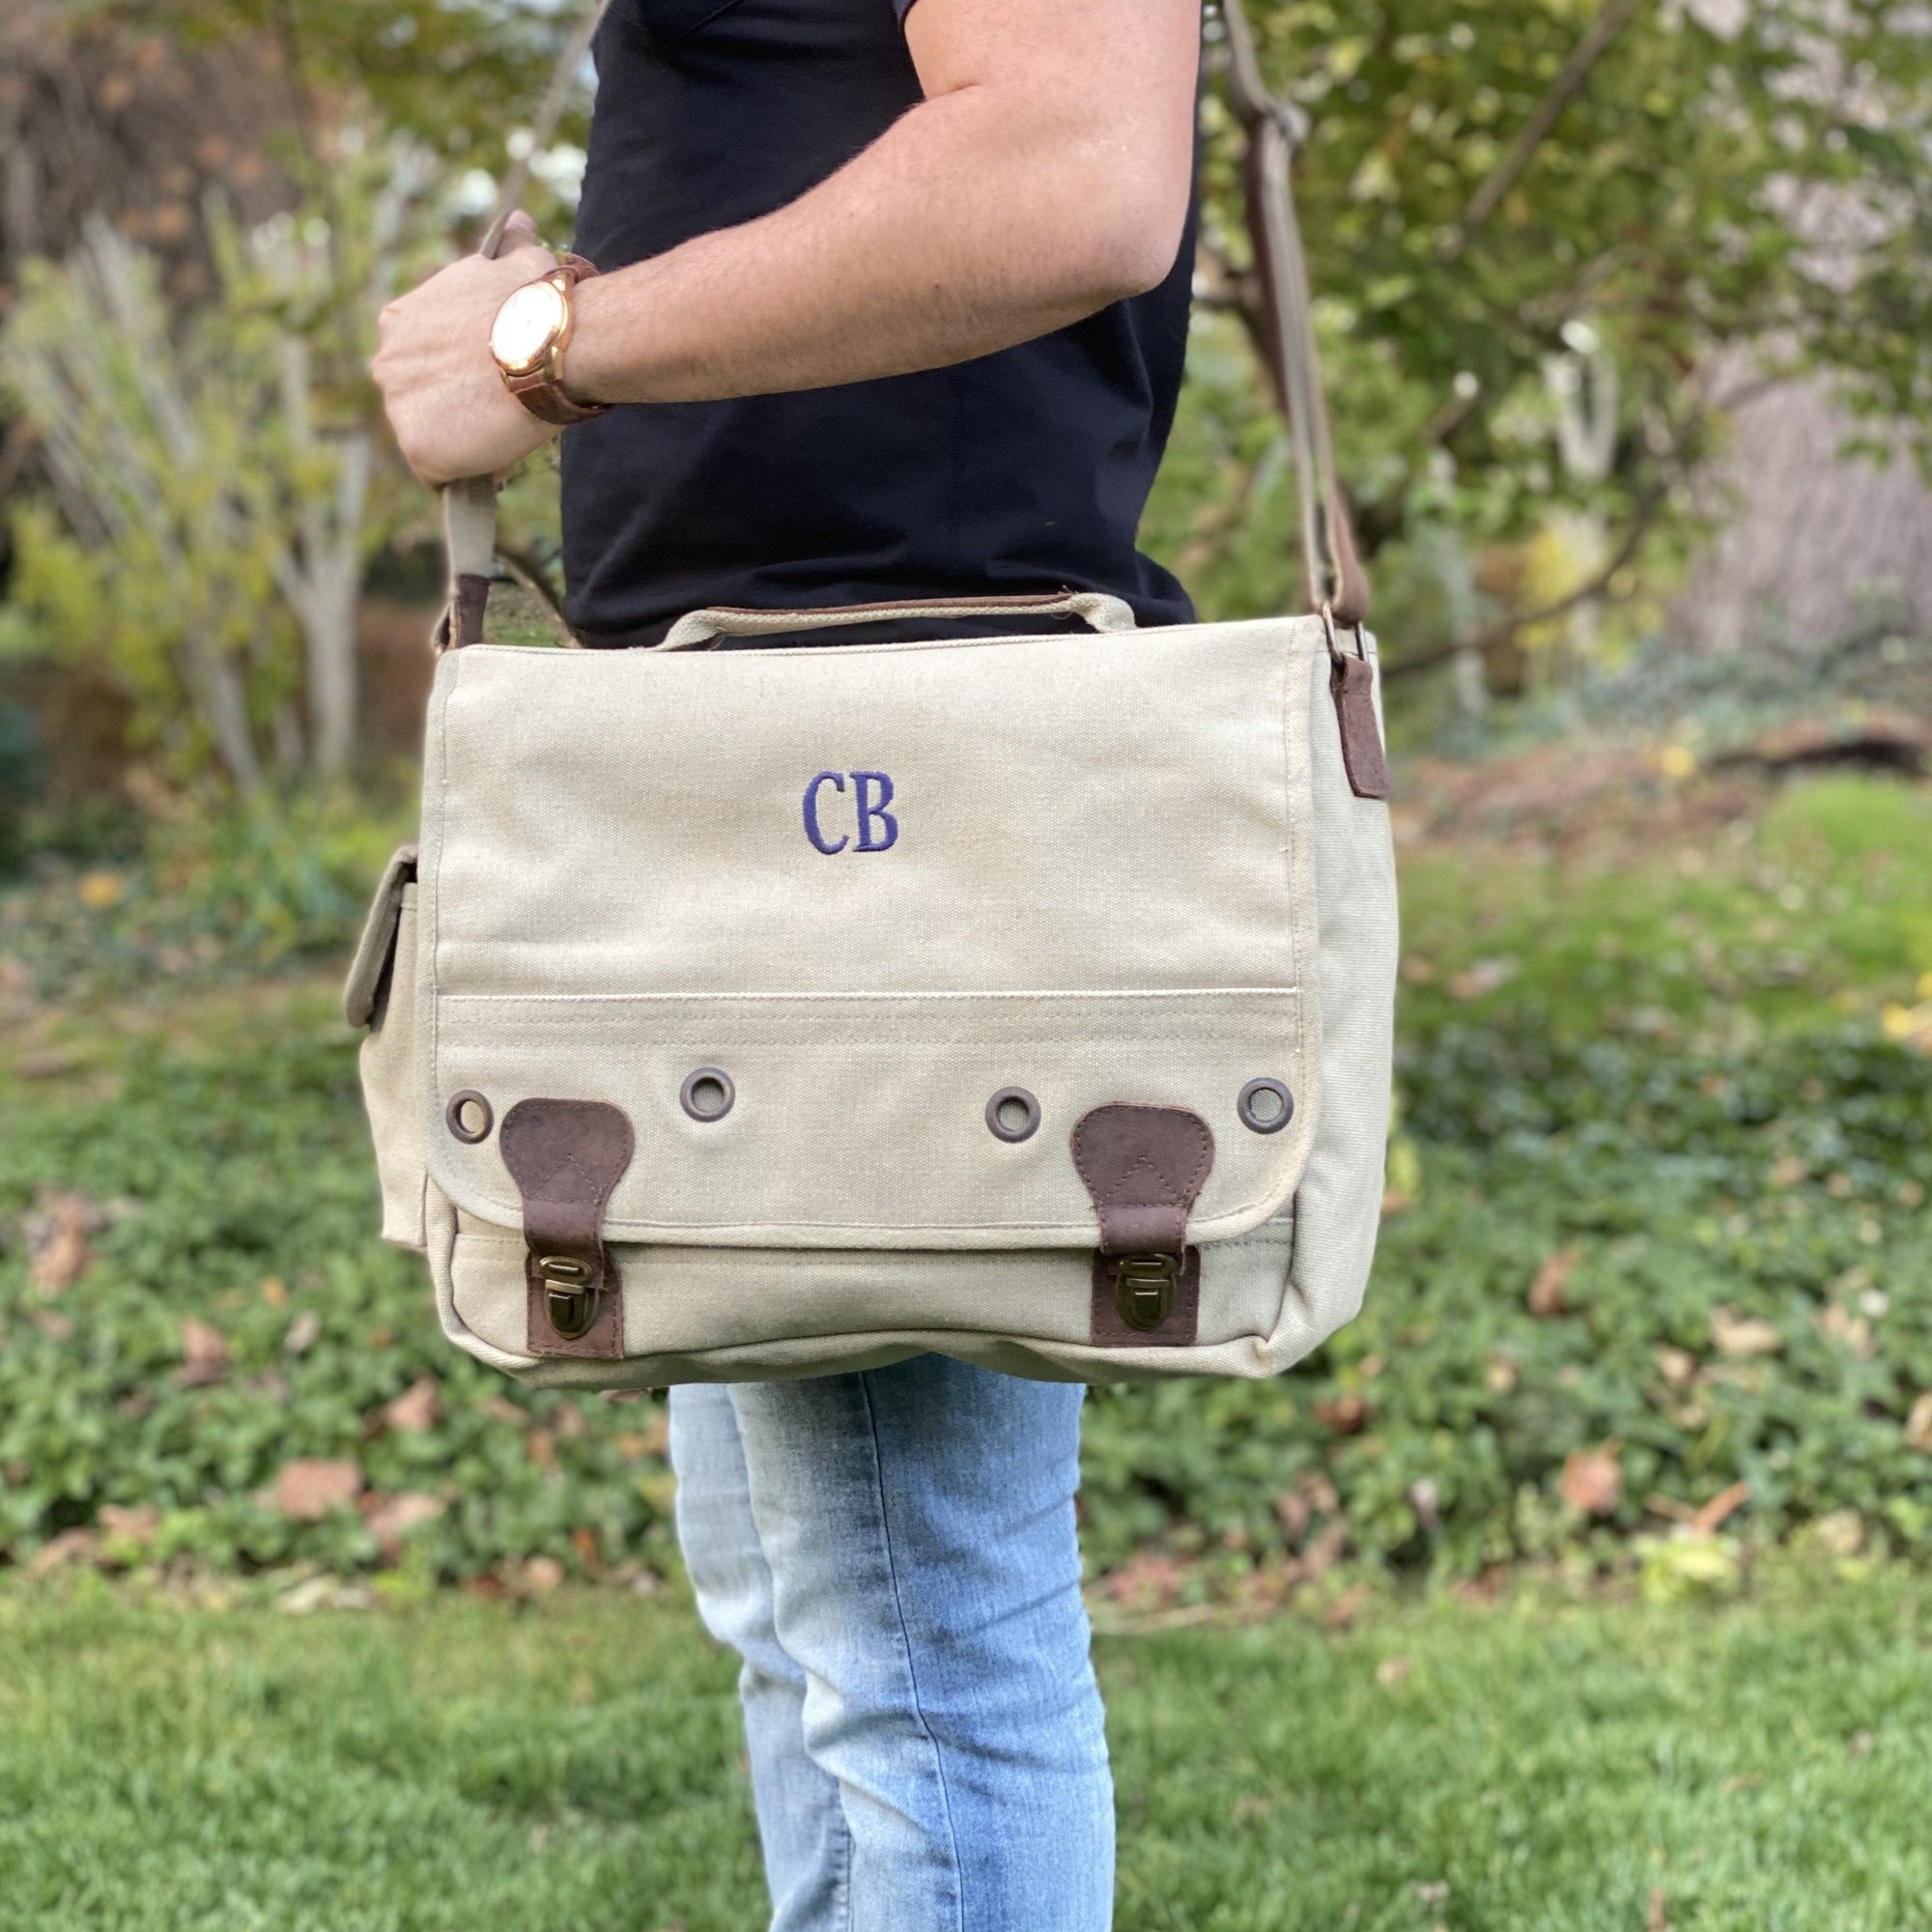 Personalized Bags for Men